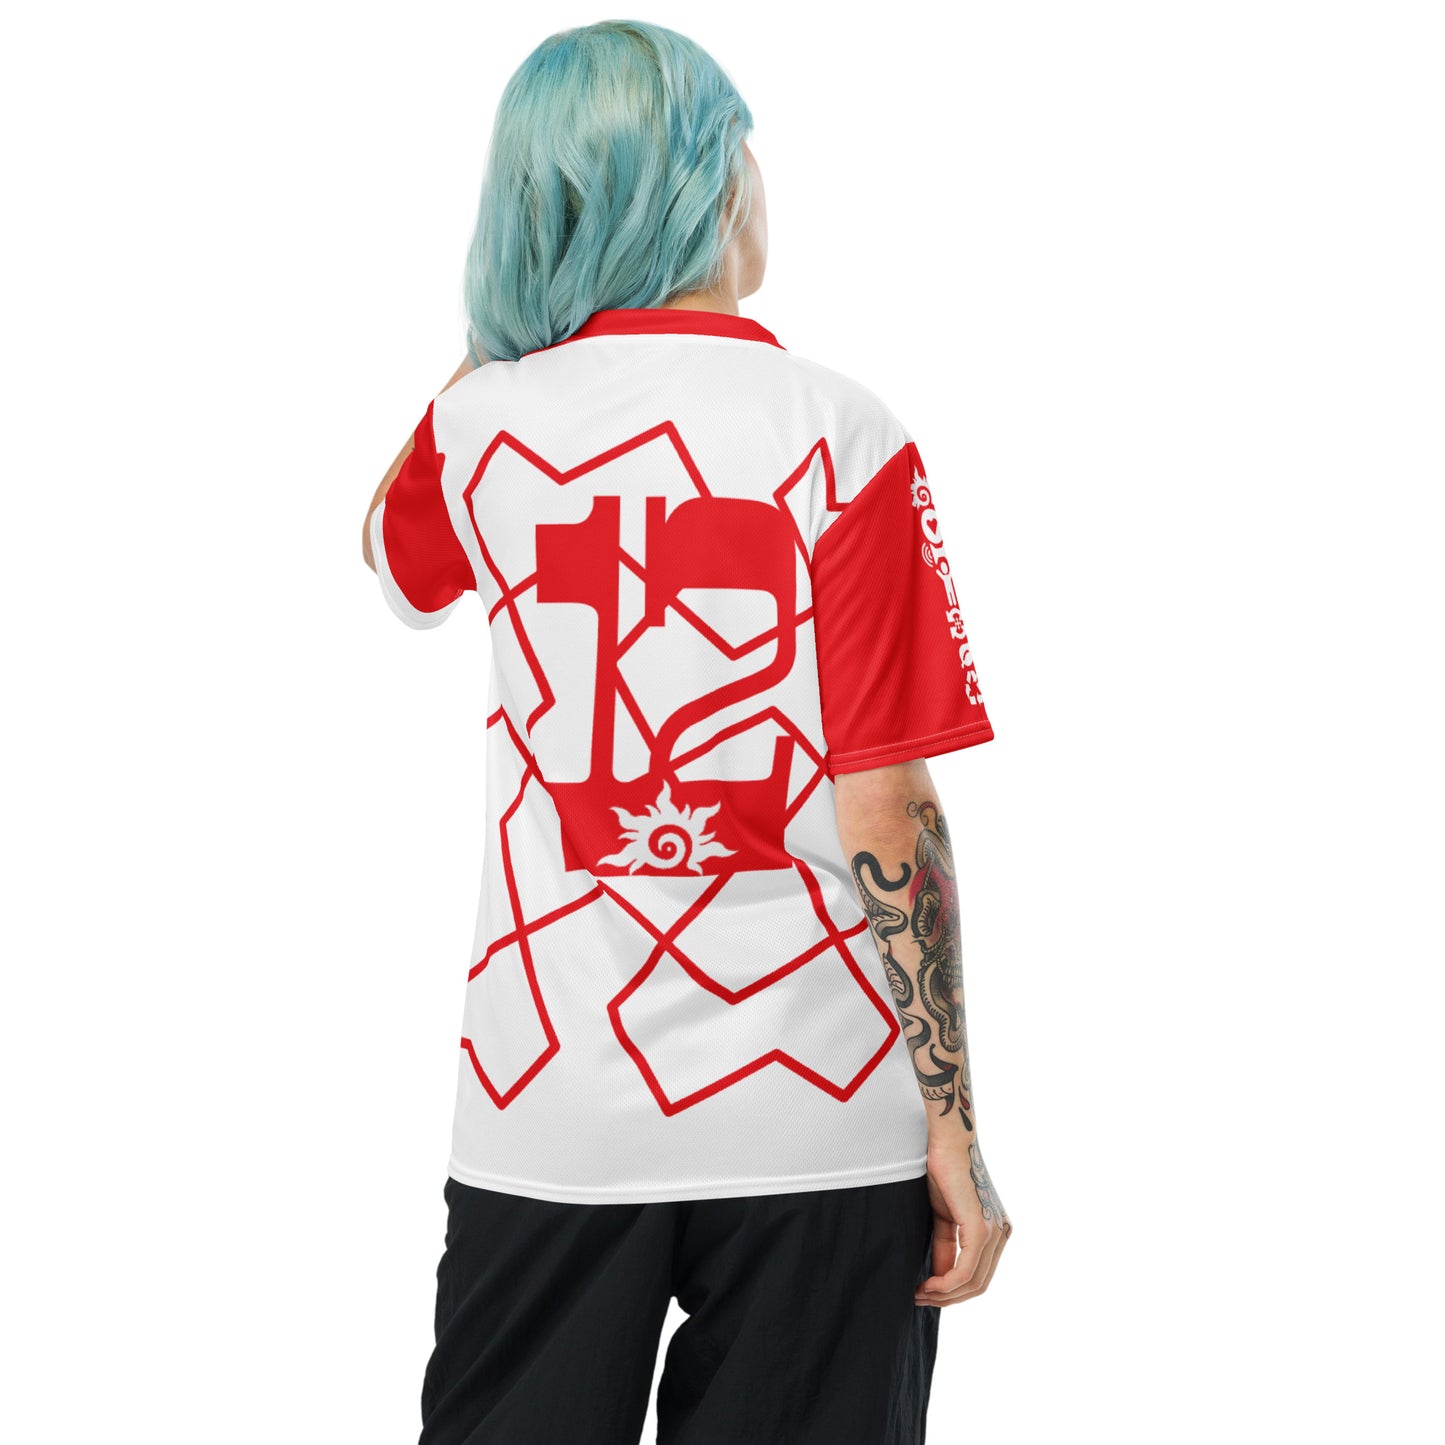 Recycled Unisex Sports Jersey ActSun 11